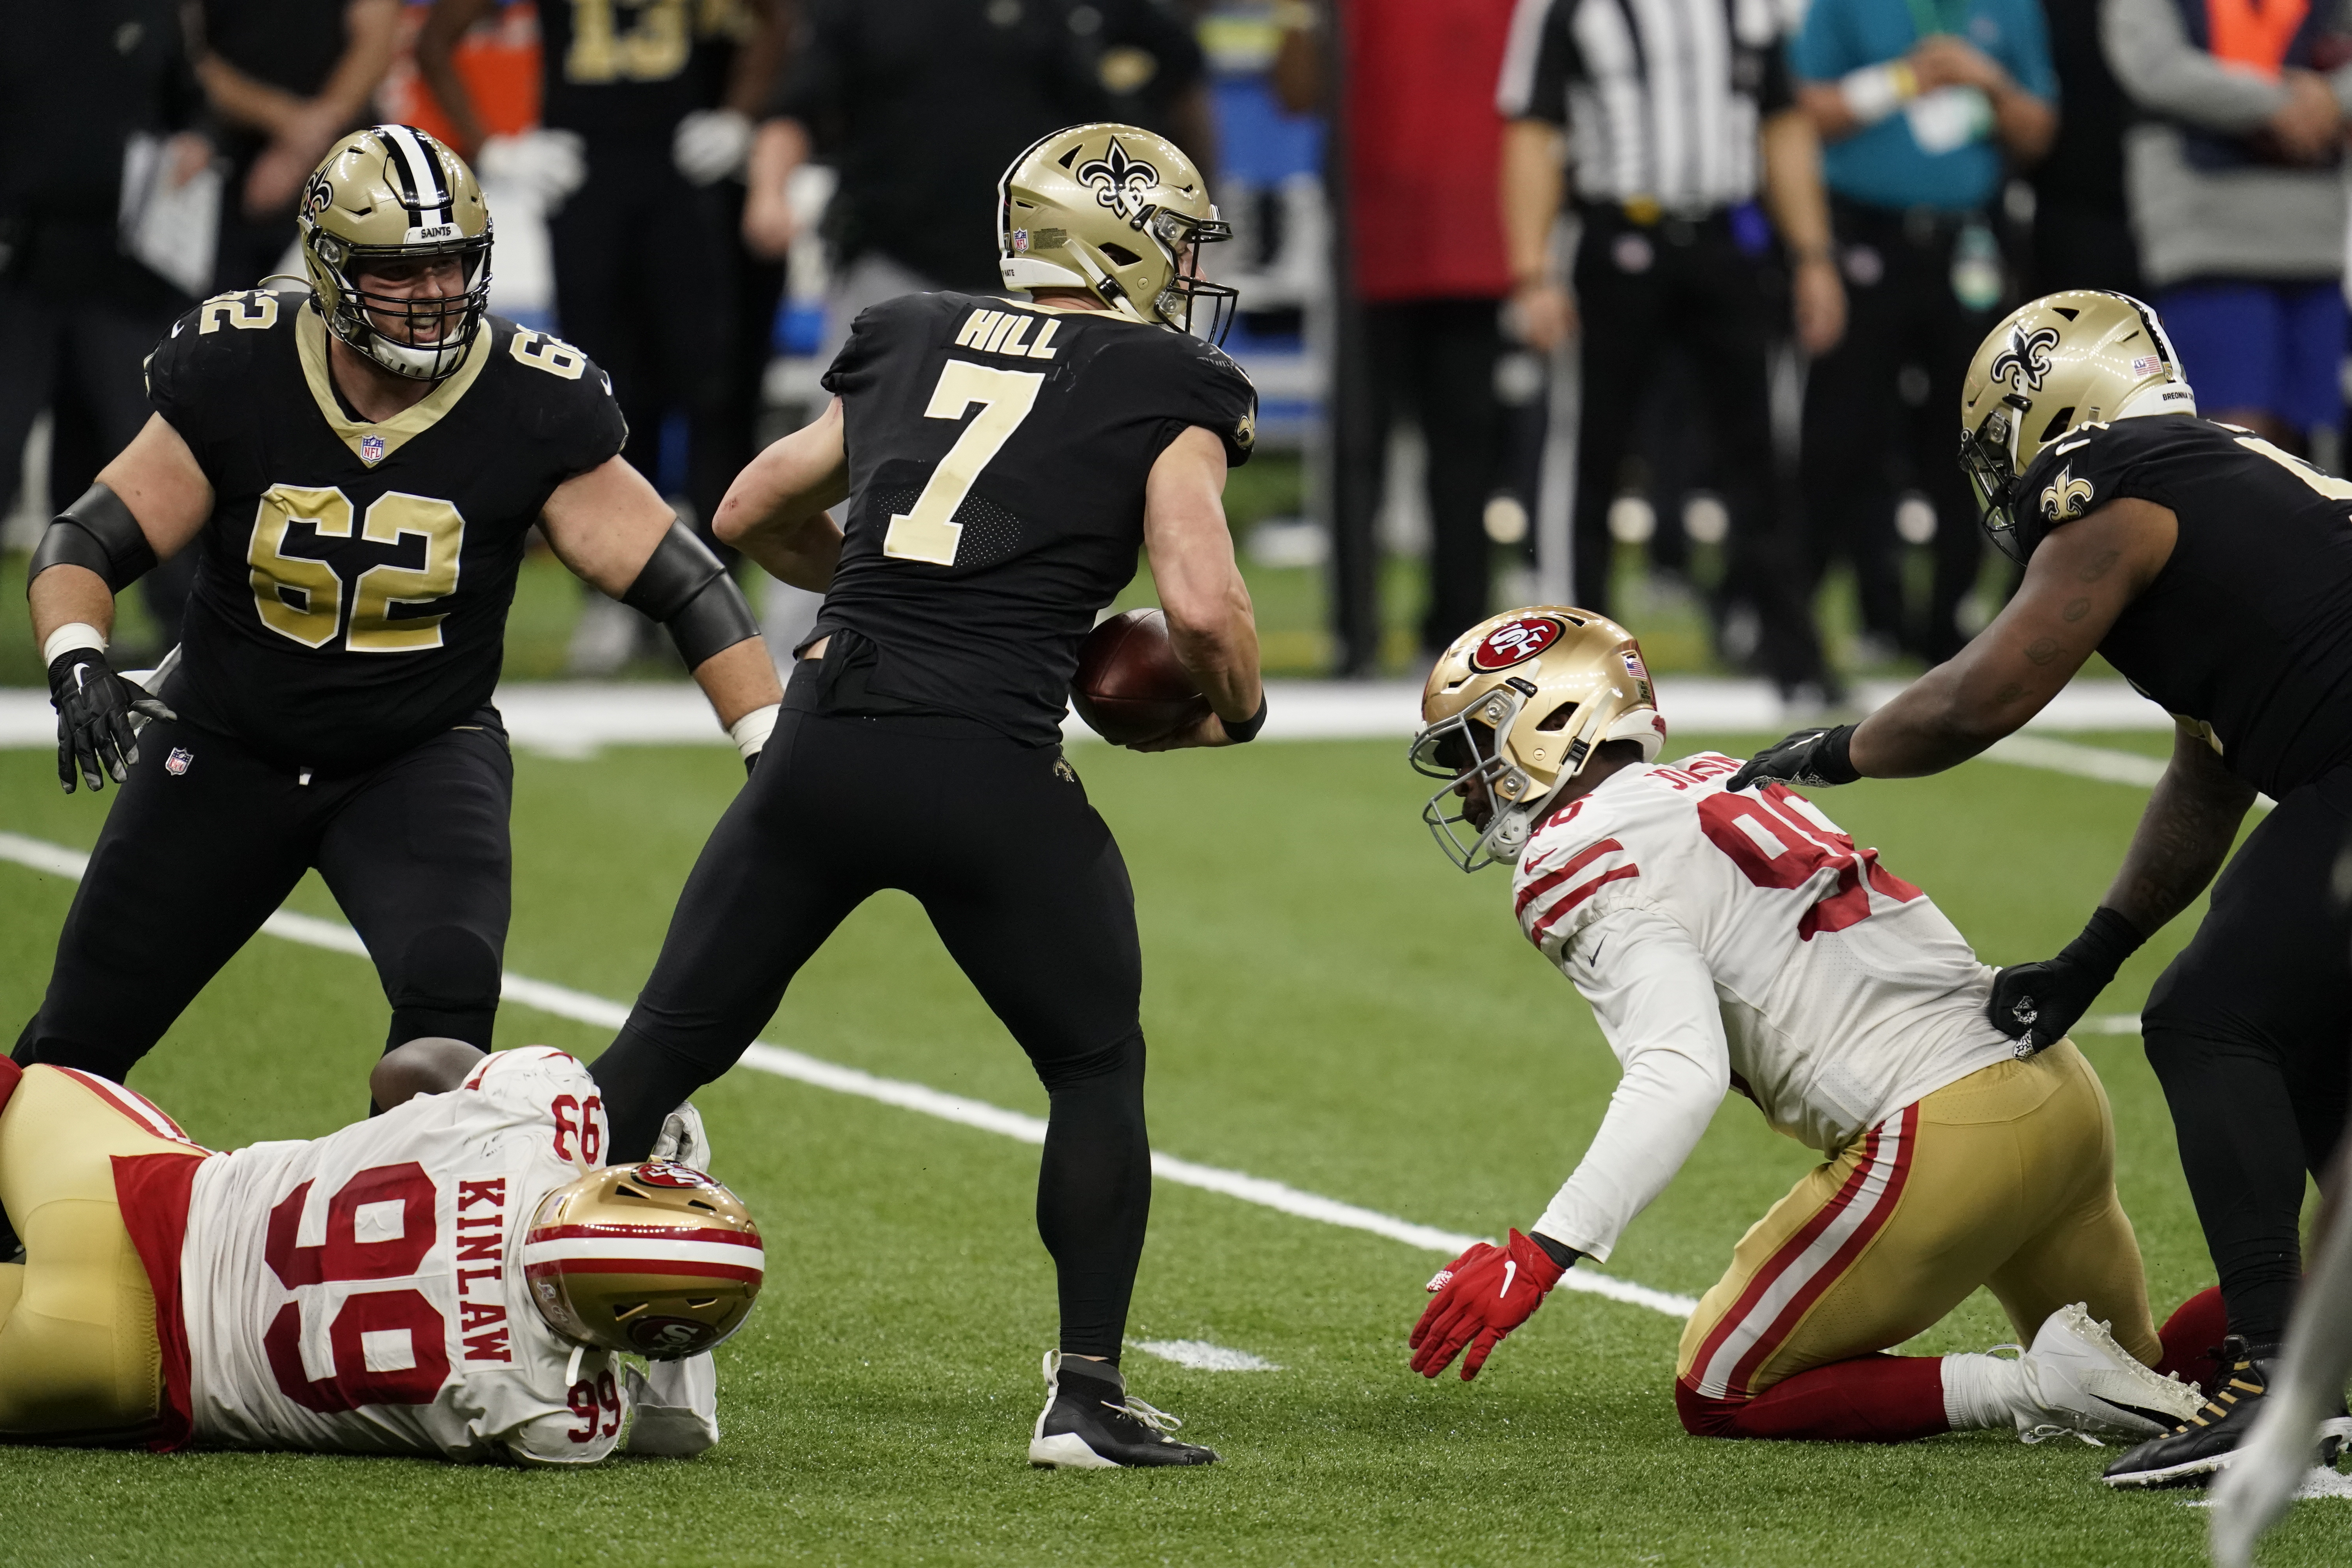 Javon Kinlaw #99 of the San Francisco 49ers sacks Taysom Hill #7 of the New Orleans Saints during an NFL game at Mercedes-Benz Superdome on November 15, 2020 in New Orleans, Louisiana.